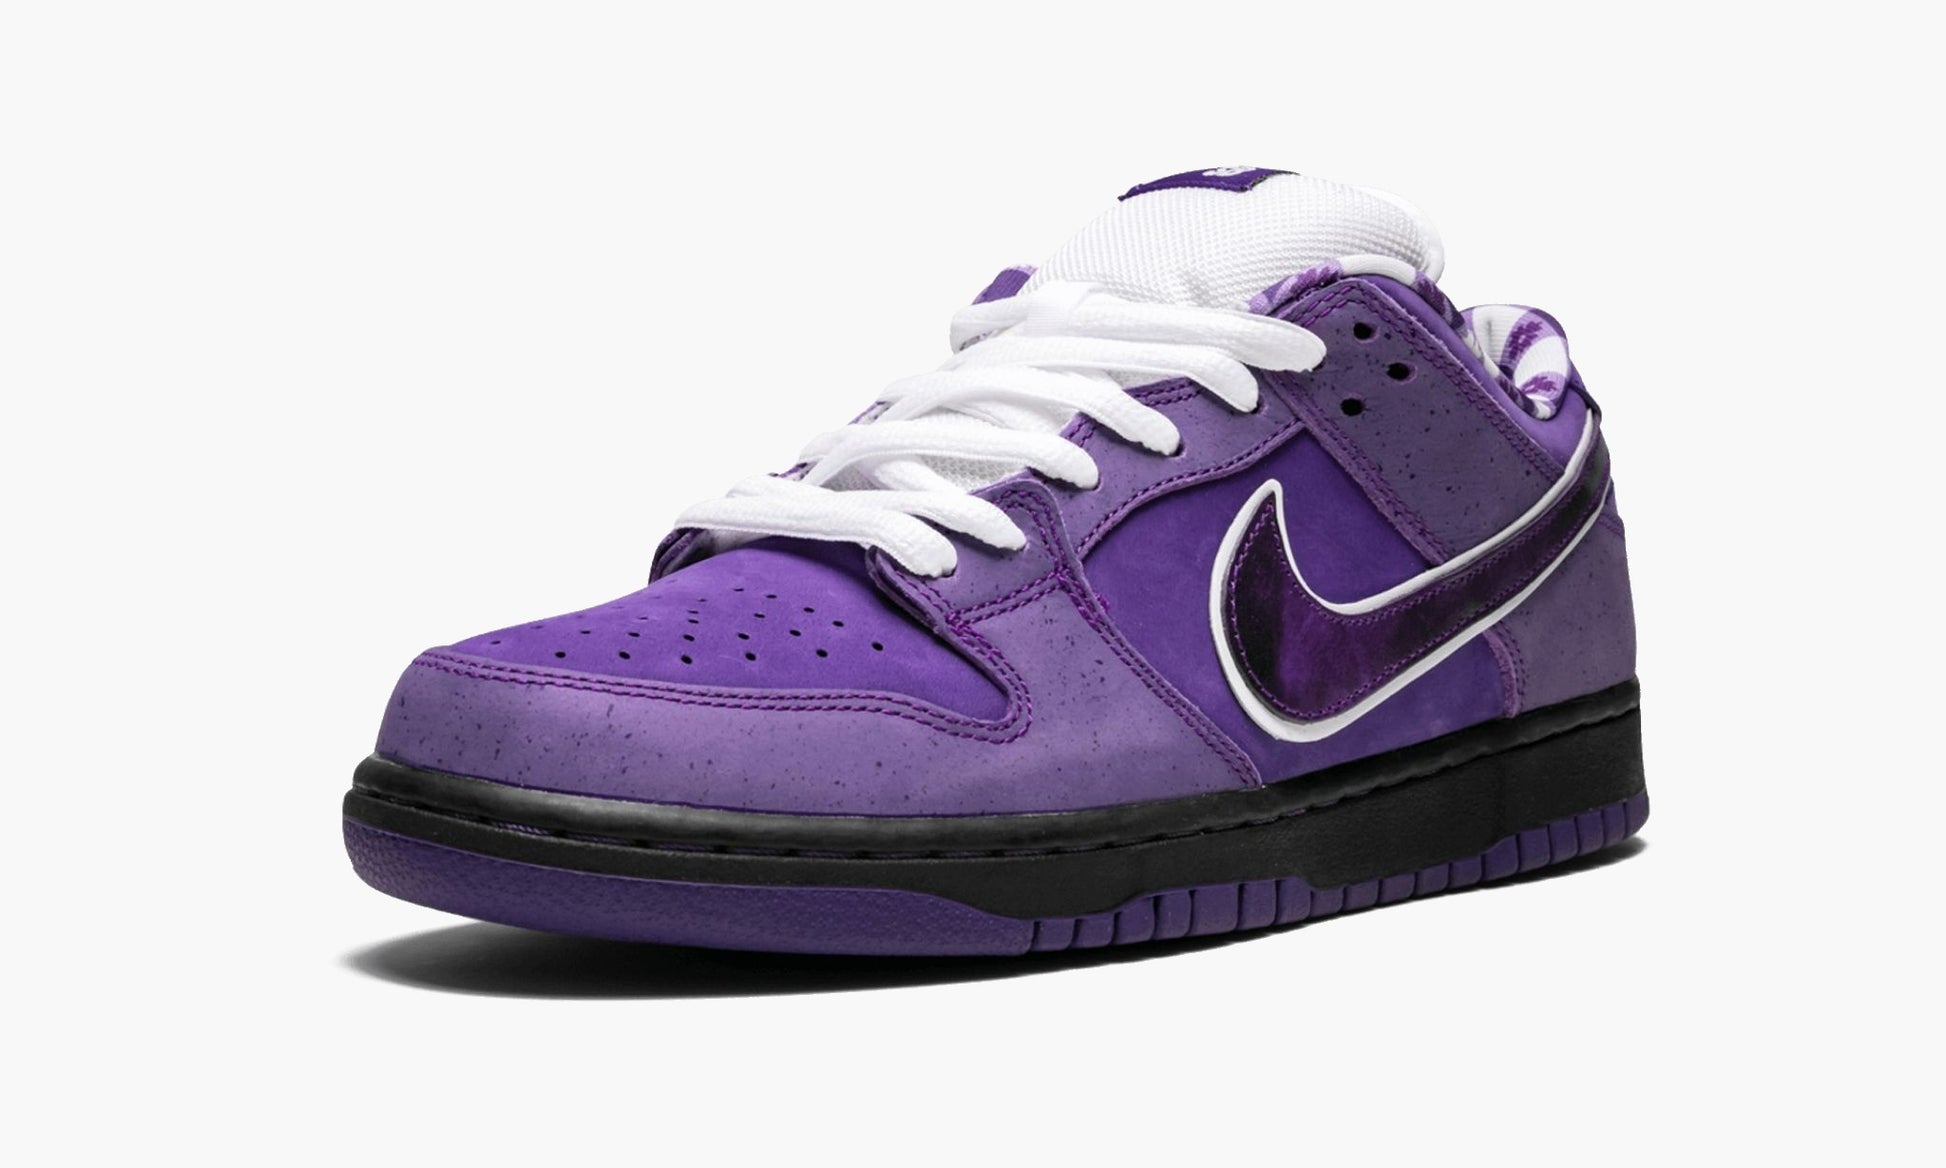 SB Dunk Low Concepts Purple Lobster Special Box - BV1310 555 | The Sortage